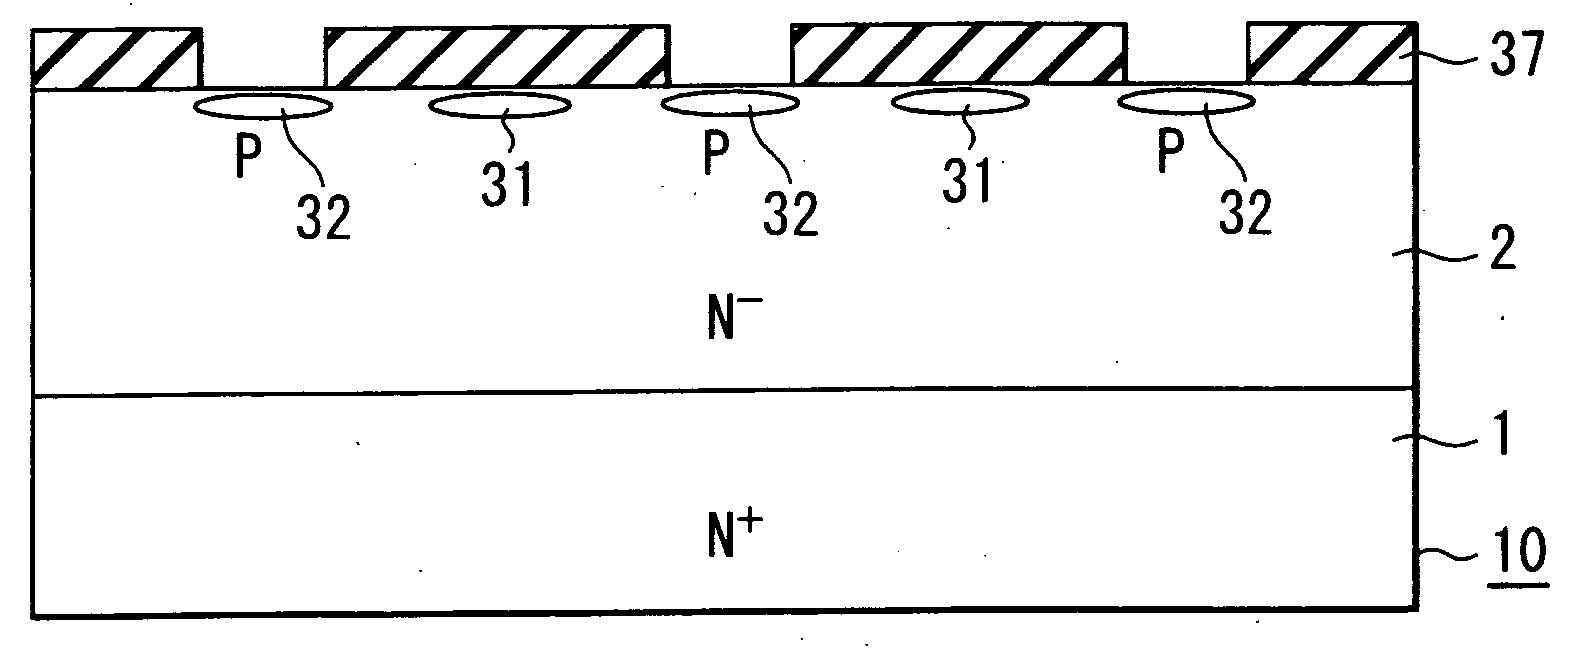 Semiconductor device having vertical metal insulator semiconductor transistors having plural spatially overlapping regions of different conductivity type